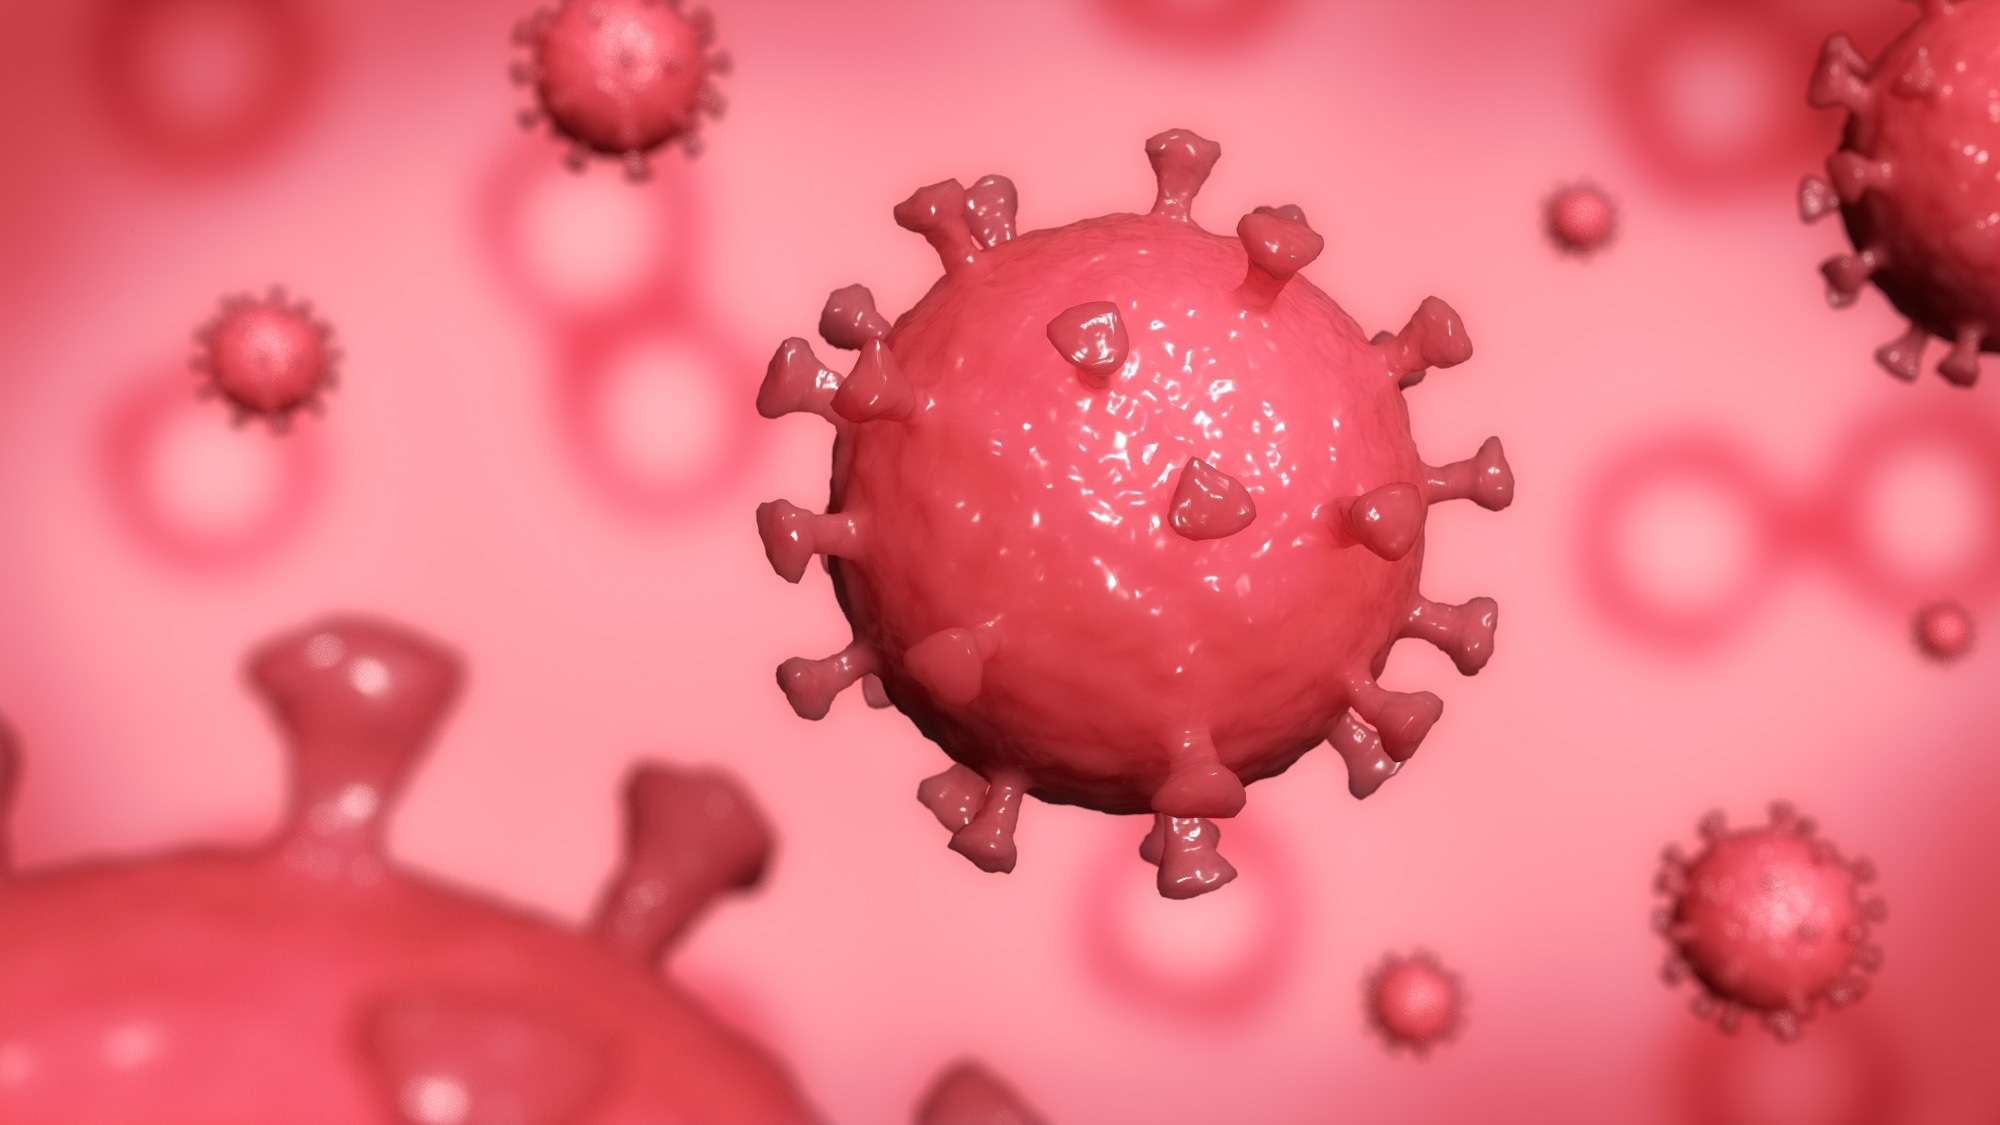 Study: Endo-lysosome-targeted nanoparticle delivery of antiviral therapy for coronavirus infections. Image Credit: Broadcast Media / Shutterstock.com